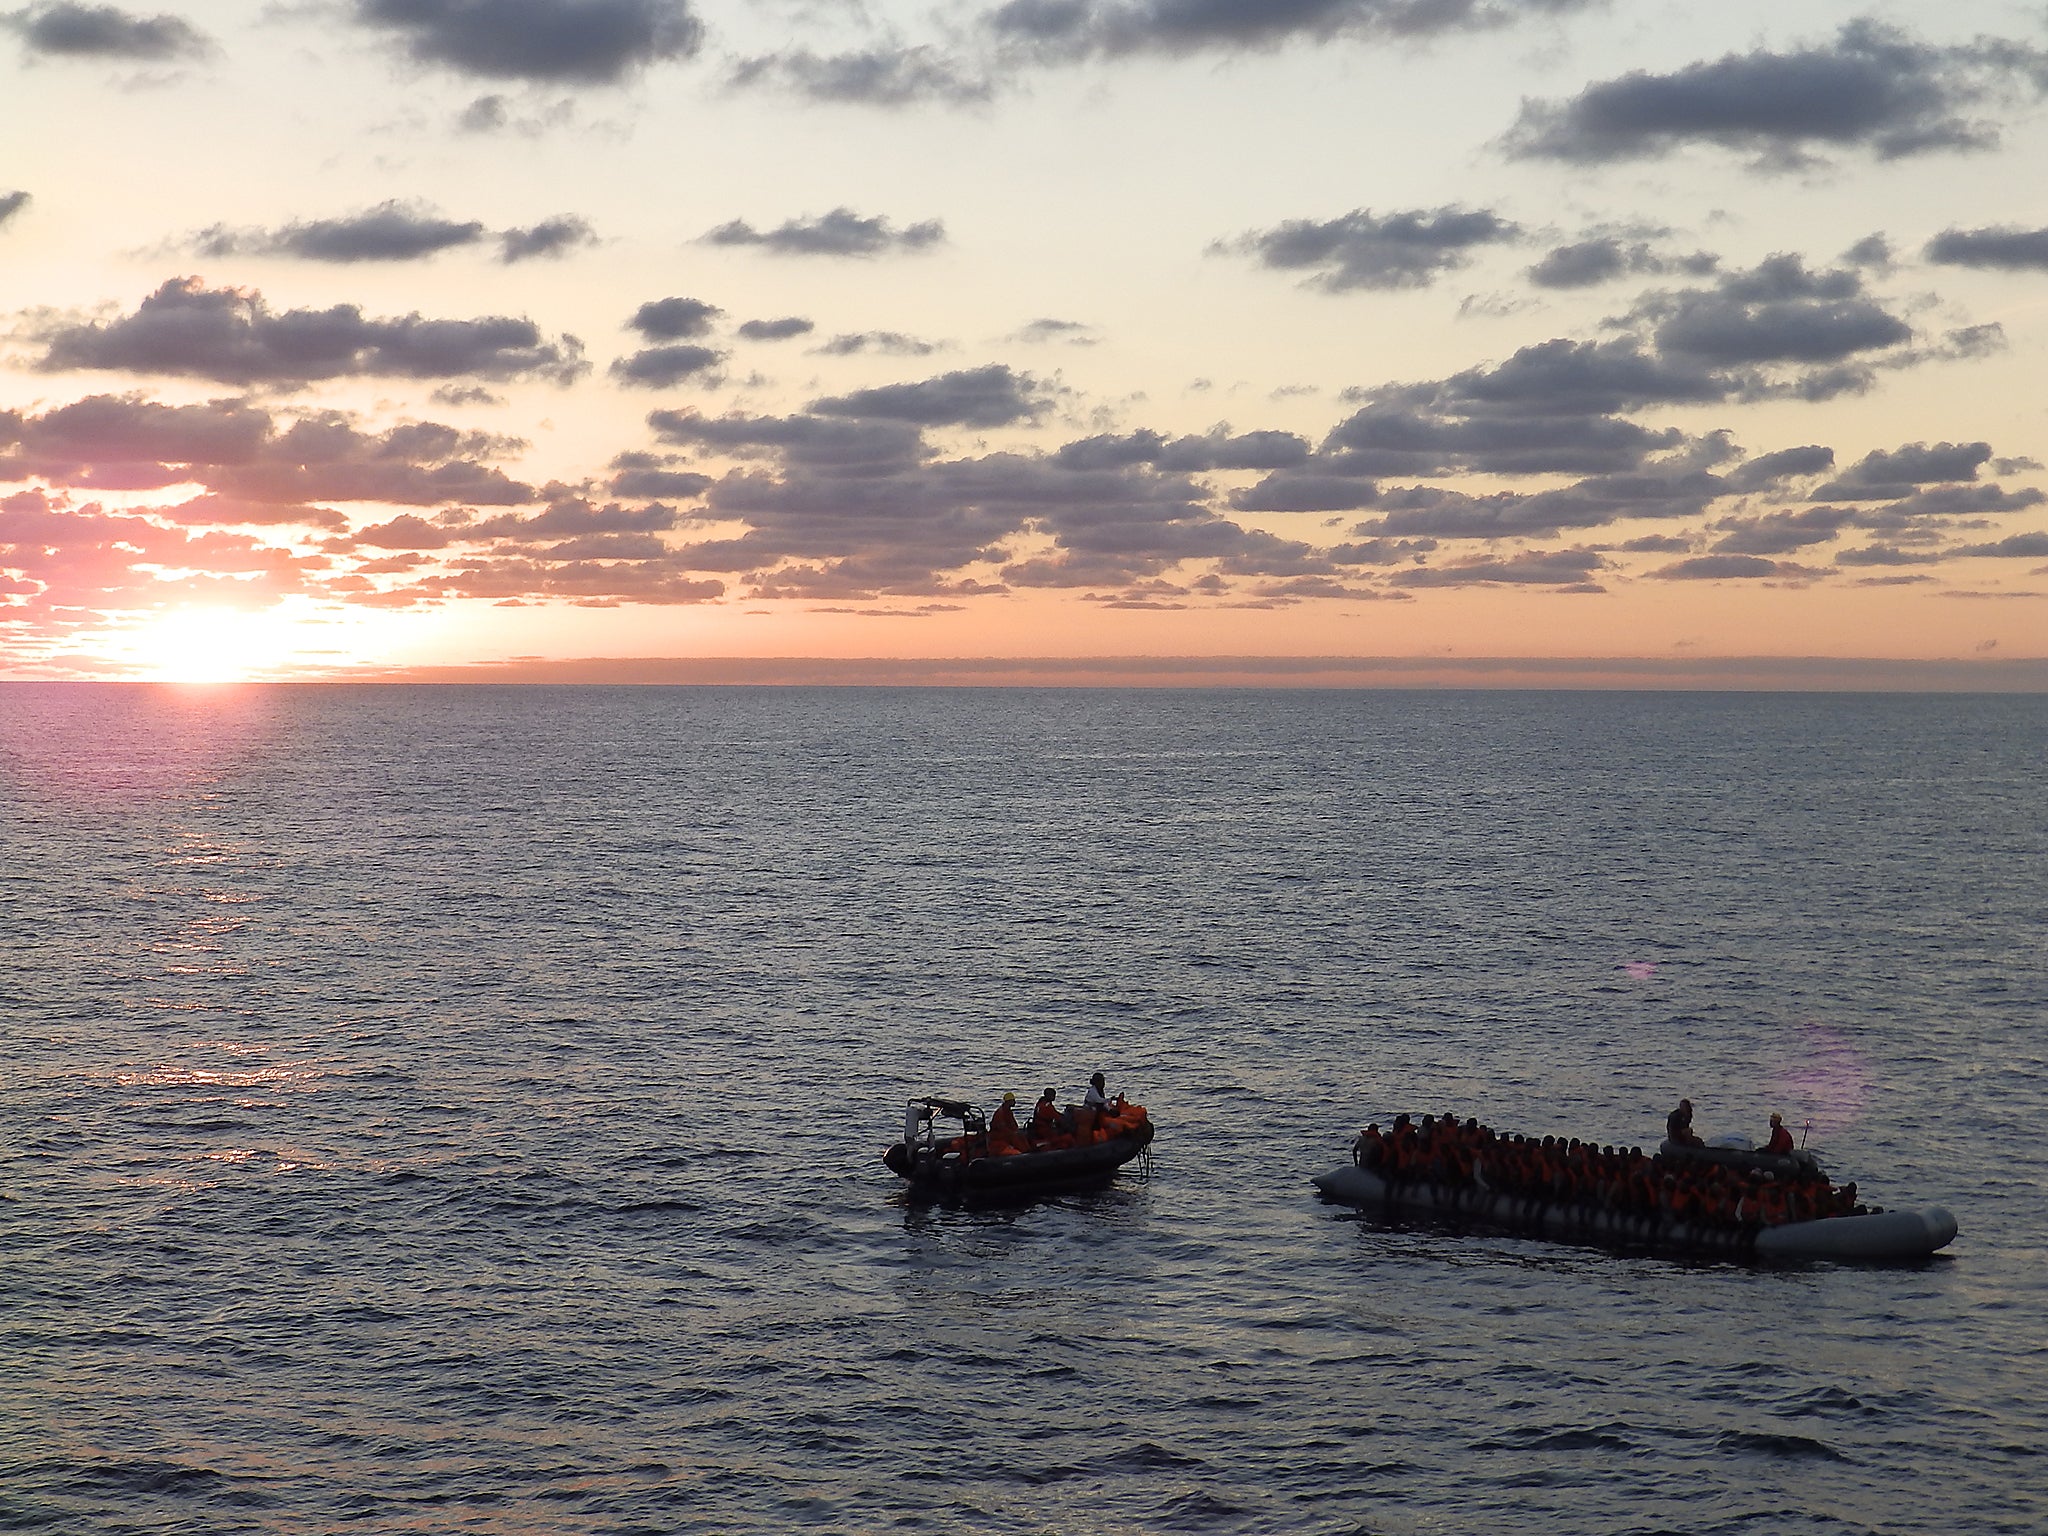 A crew from MSF's Bourbon Argos ship rescuing a boat carrying 130 migrants and refugees off the coast of Libya, at sunrise